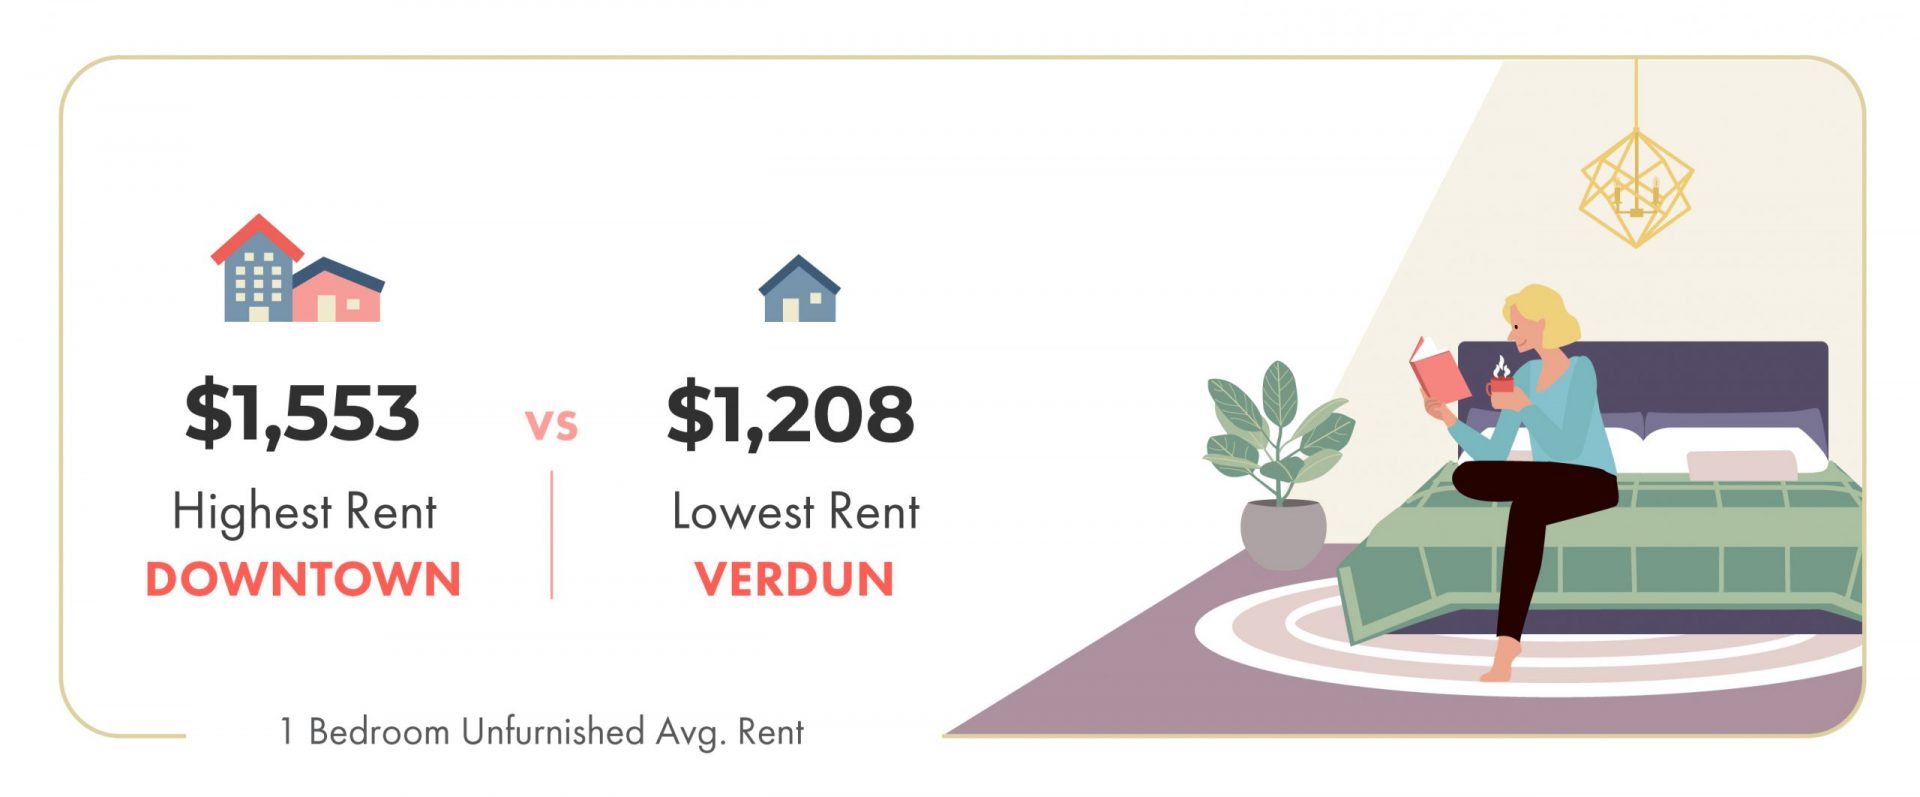 May 2020 Montreal Rent Report, May 2020 Montreal rent prices